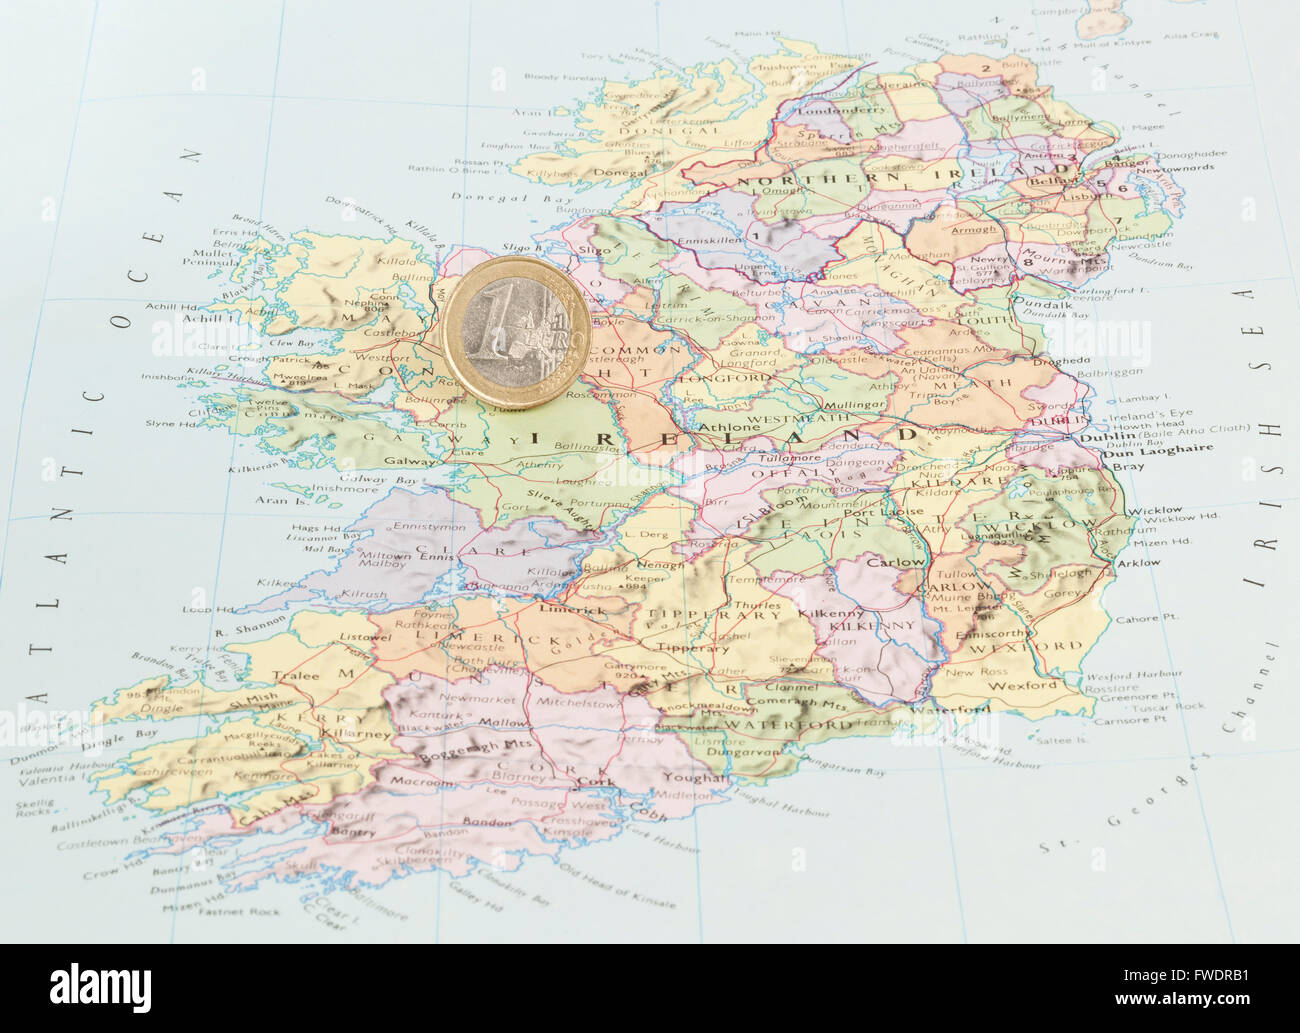 A Euro coin on a map of Ireland Stock Photo